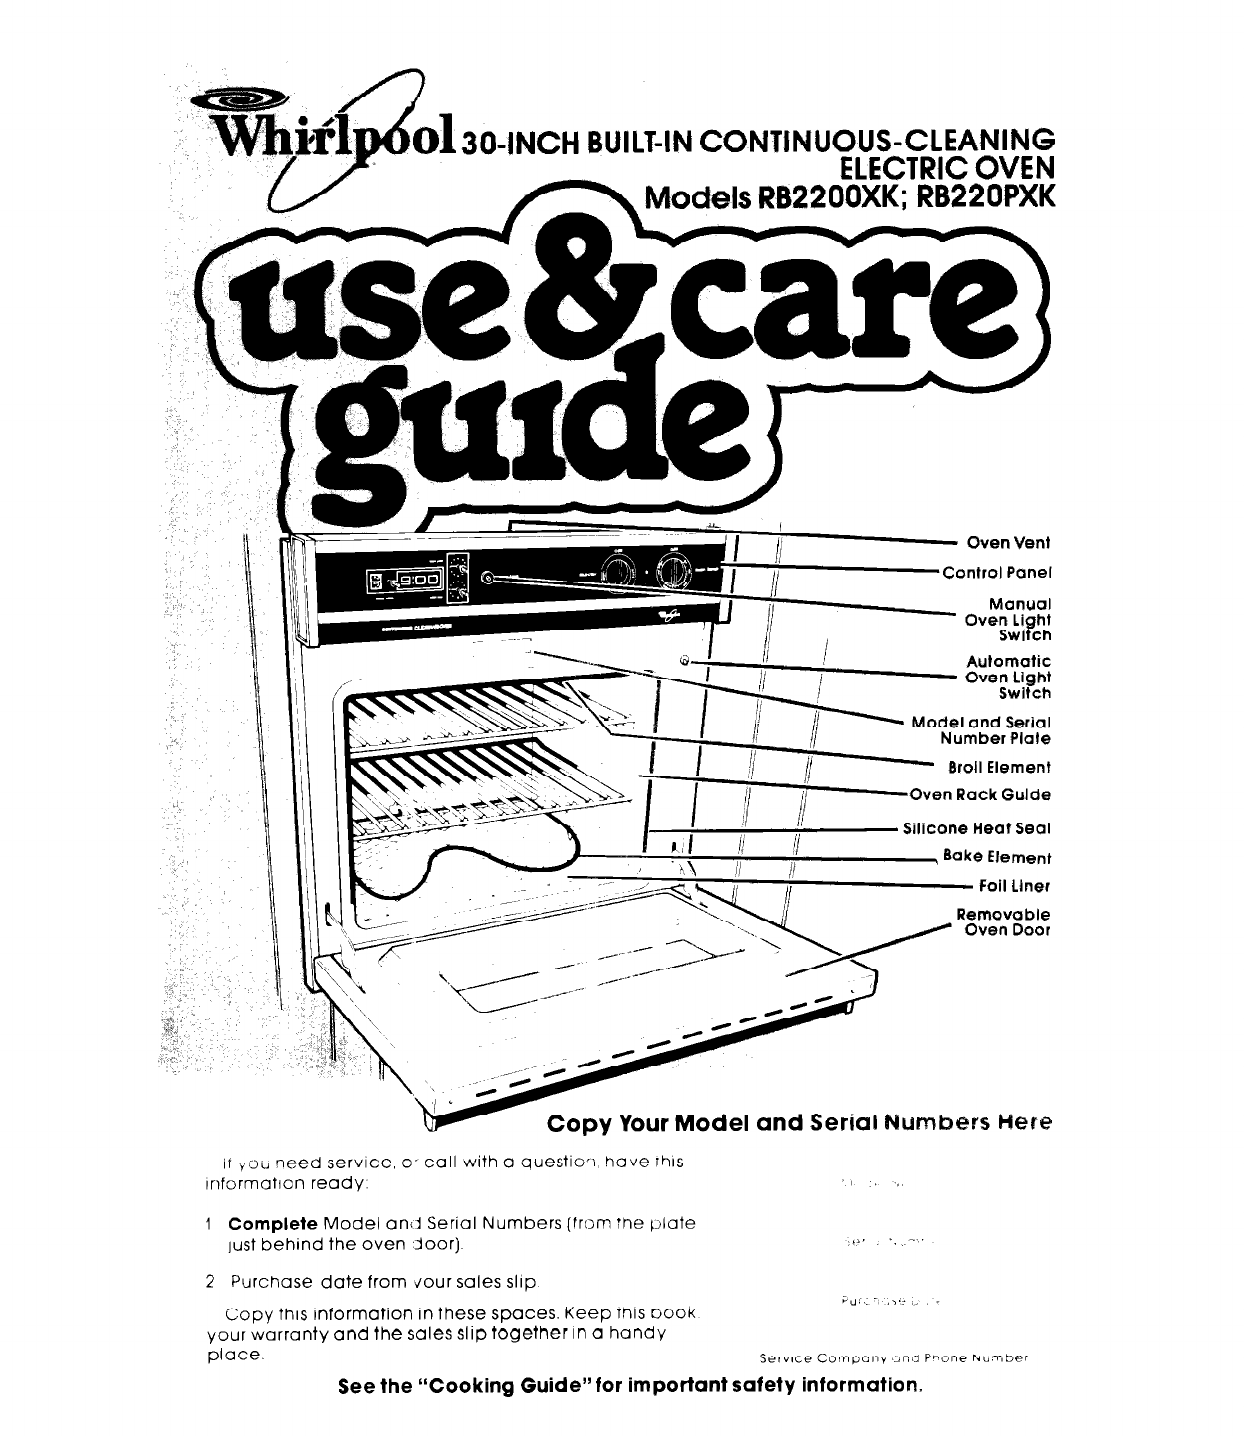 Whirlpool manual for oven